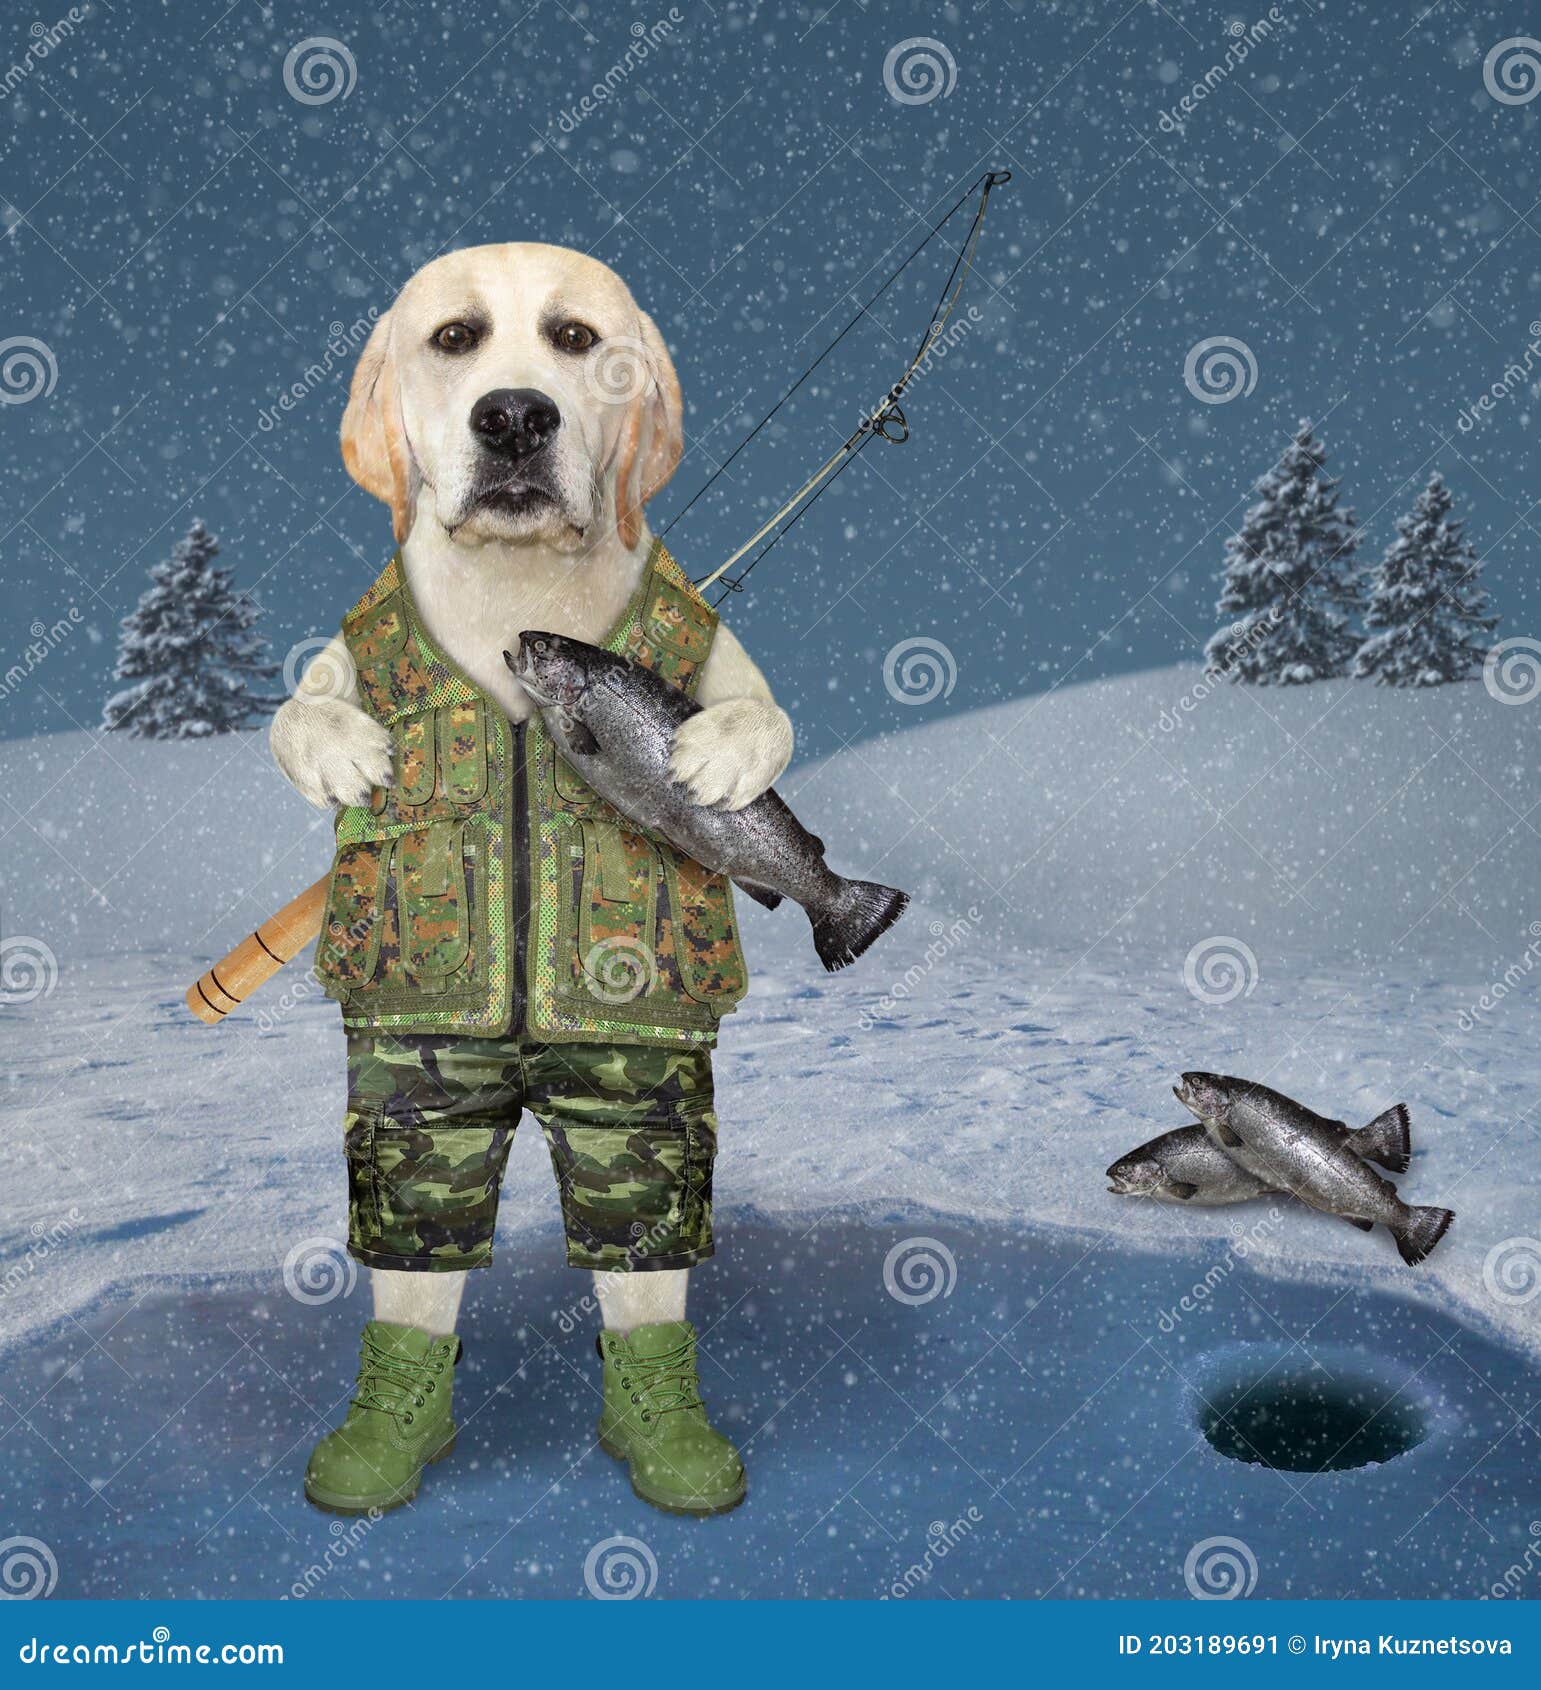 https://thumbs.dreamstime.com/z/dog-fisherman-uniform-fishing-rod-behind-his-back-holds-caught-fish-frozen-lake-winter-forest-dog-rod-203189691.jpg